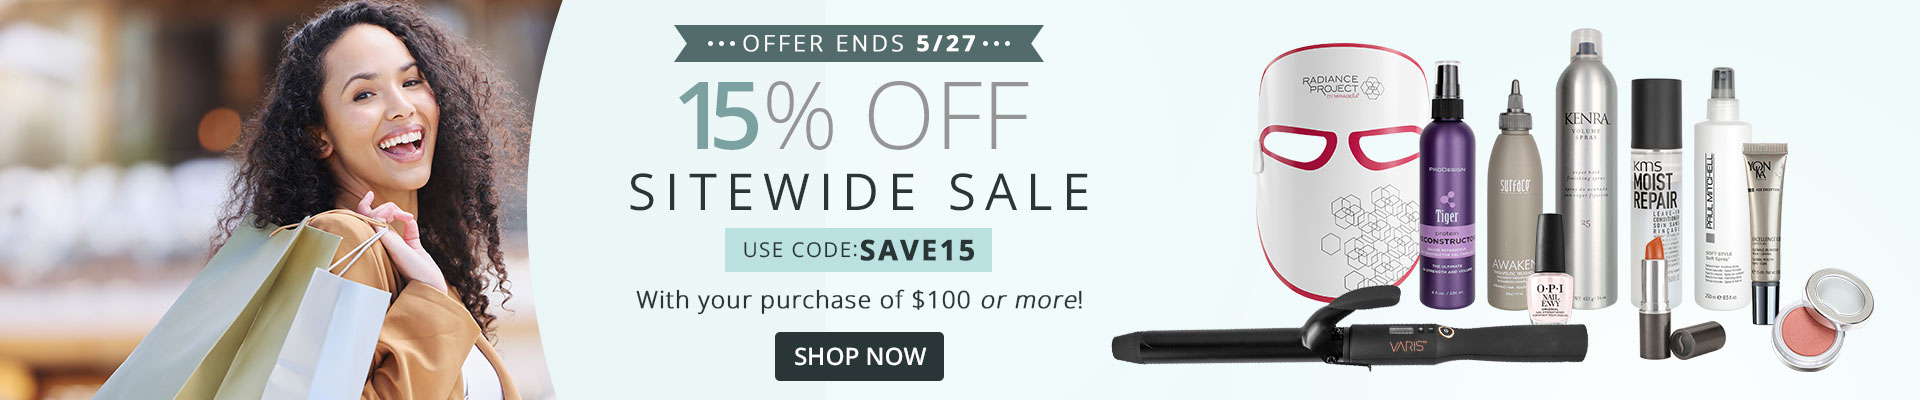 15% Off Sitewide Sale | Use Code: SAVE15 with your purchase of $100 or more! Ends 5/27